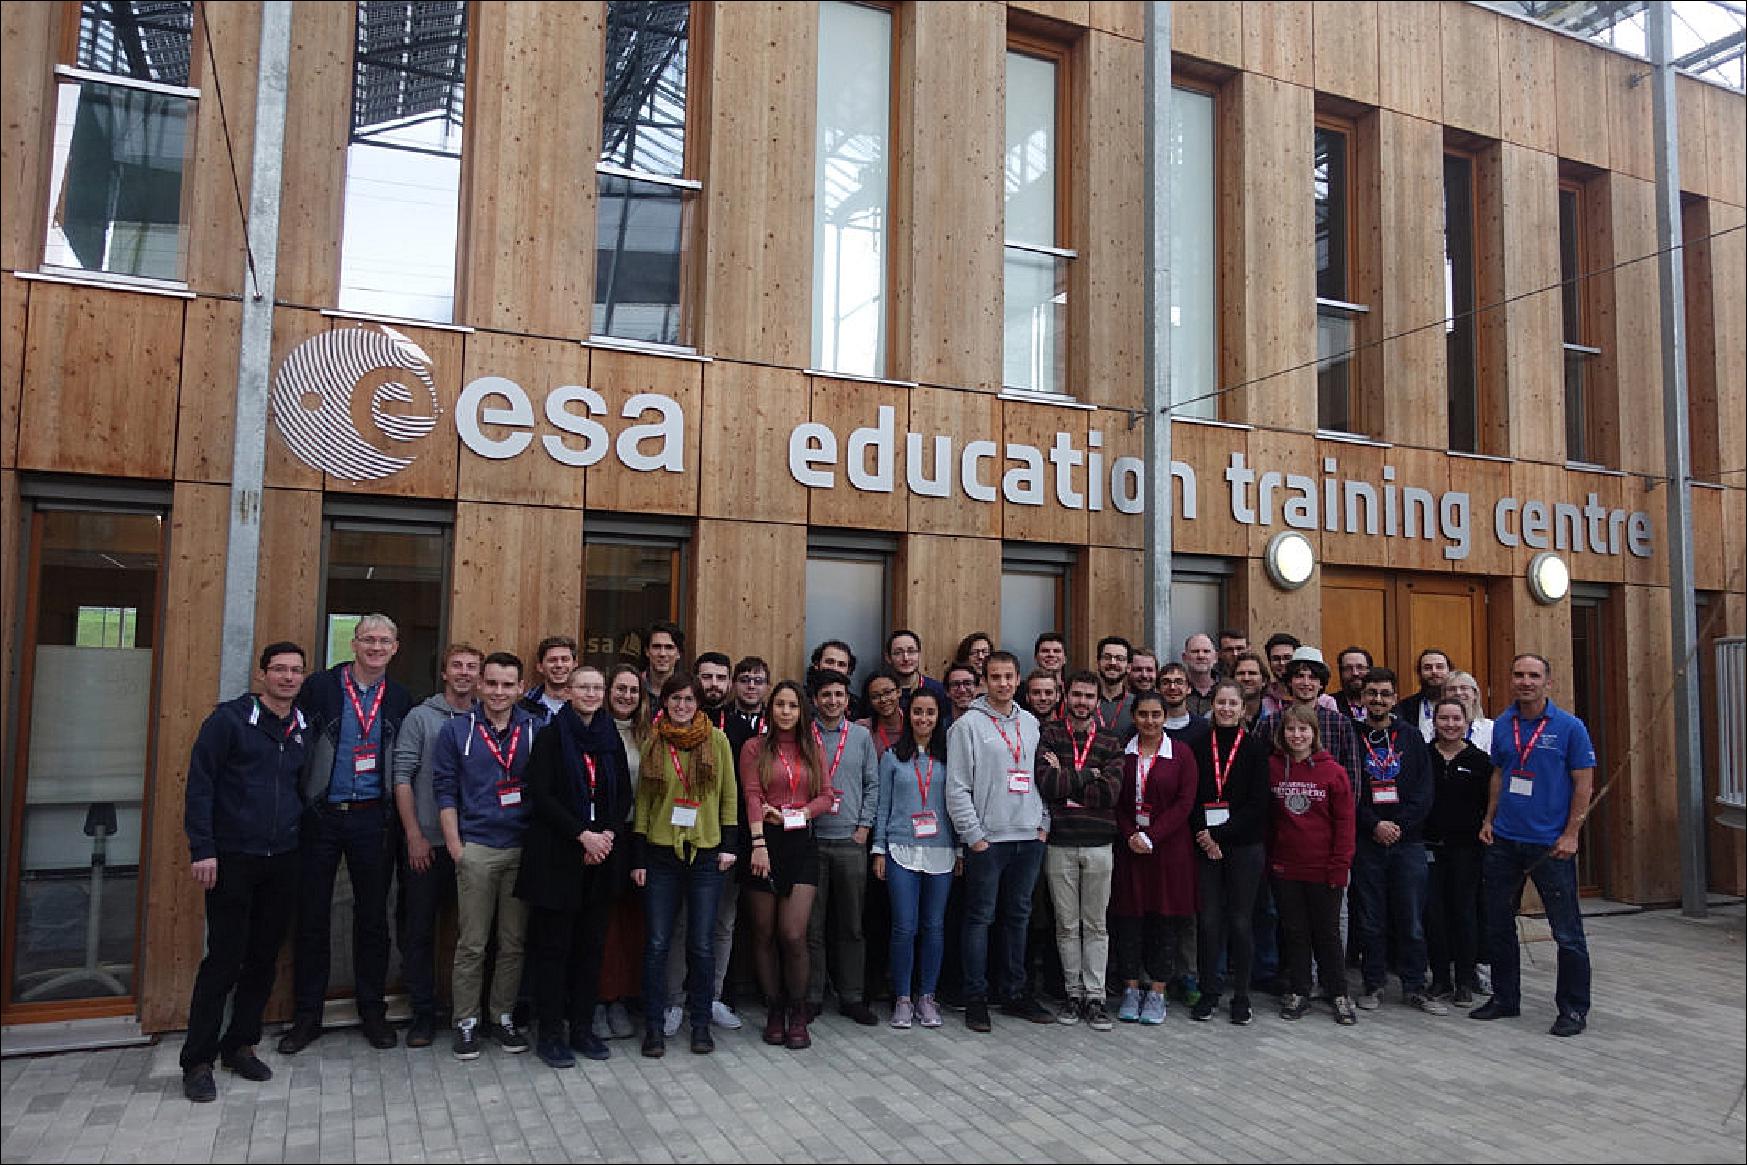 Figure 60: Photo of the students and trainers at the ESA Academy's Training Center (image credit: ESA)